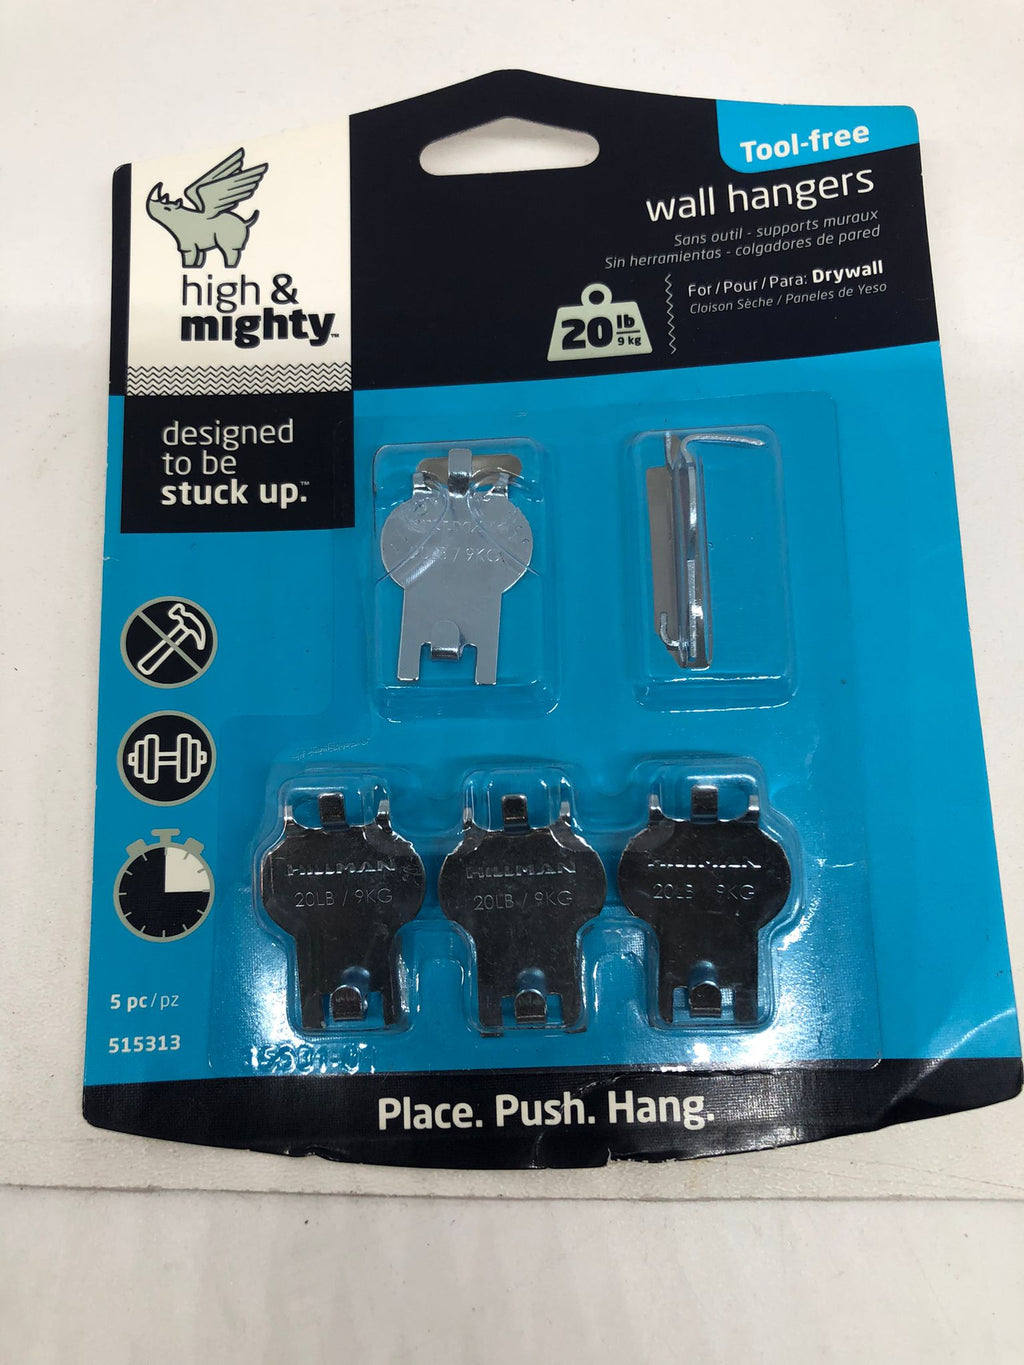 High & Mighty Picture Hangers, 20lb, 5 Sets